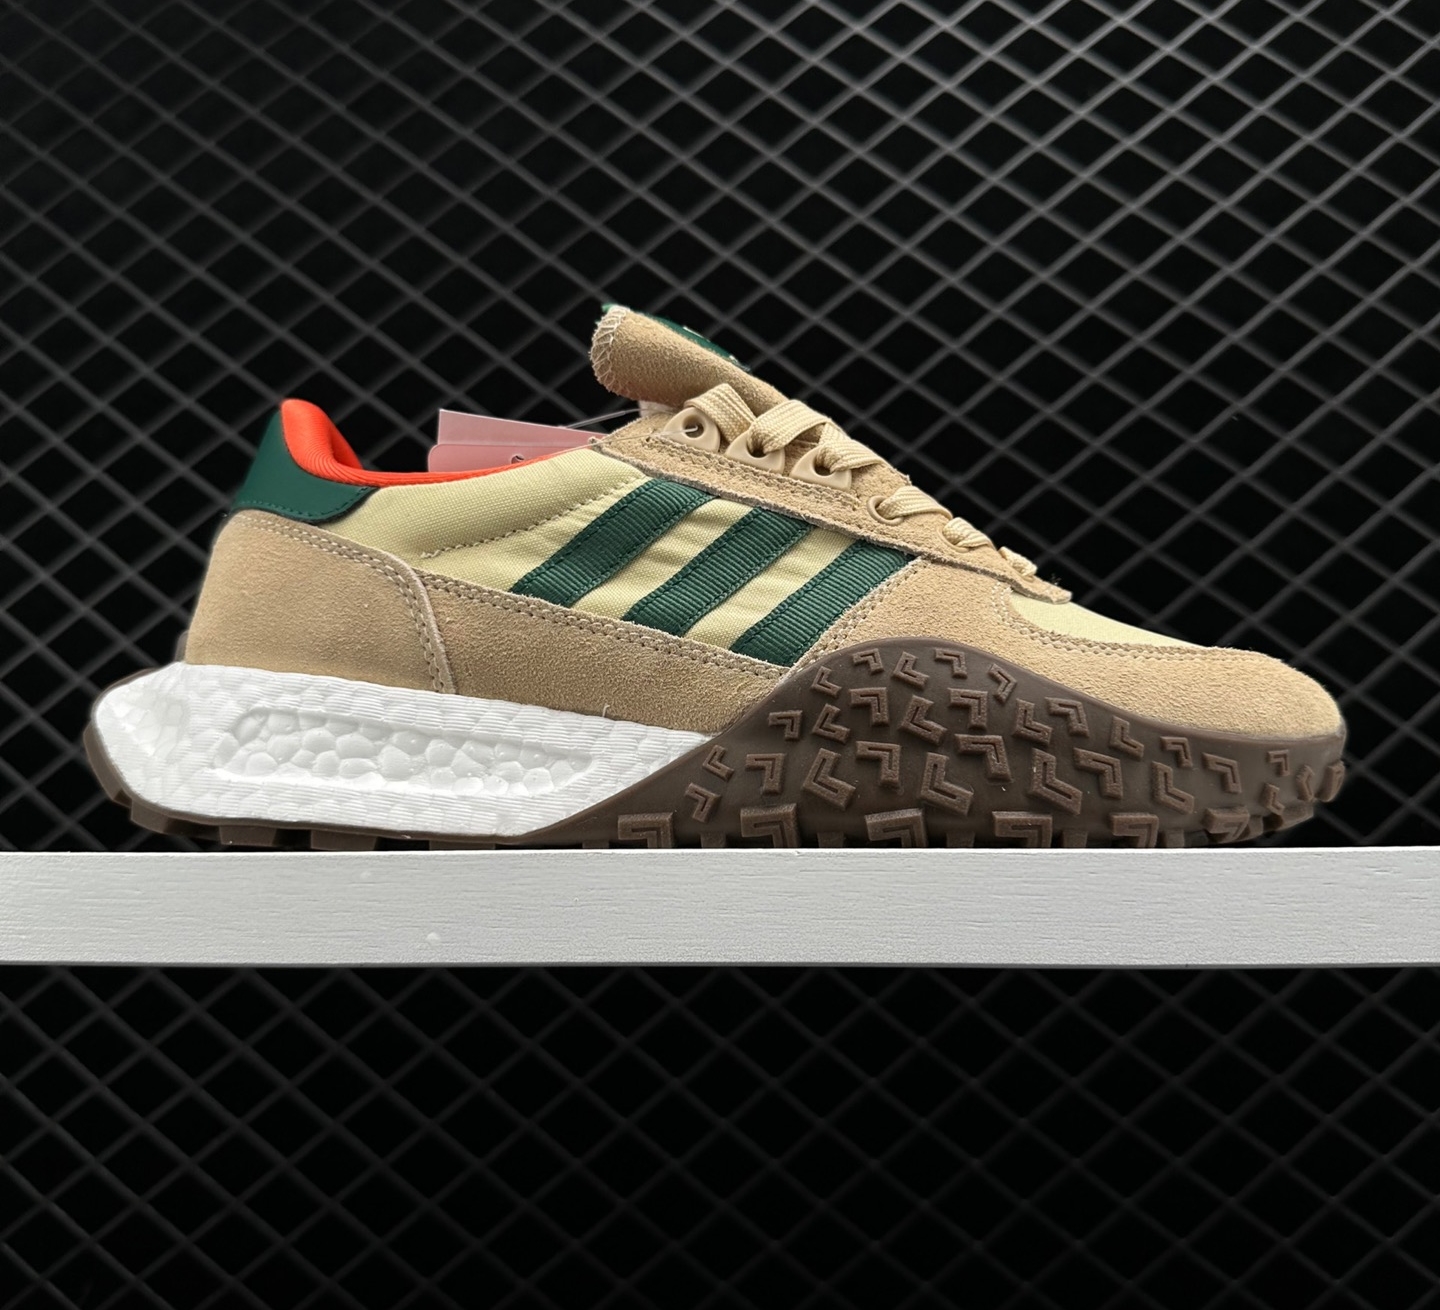 Adidas Retropy E5 W.R.P Green Brown Orange IG9983 - Stylish and Sustainable Shoes